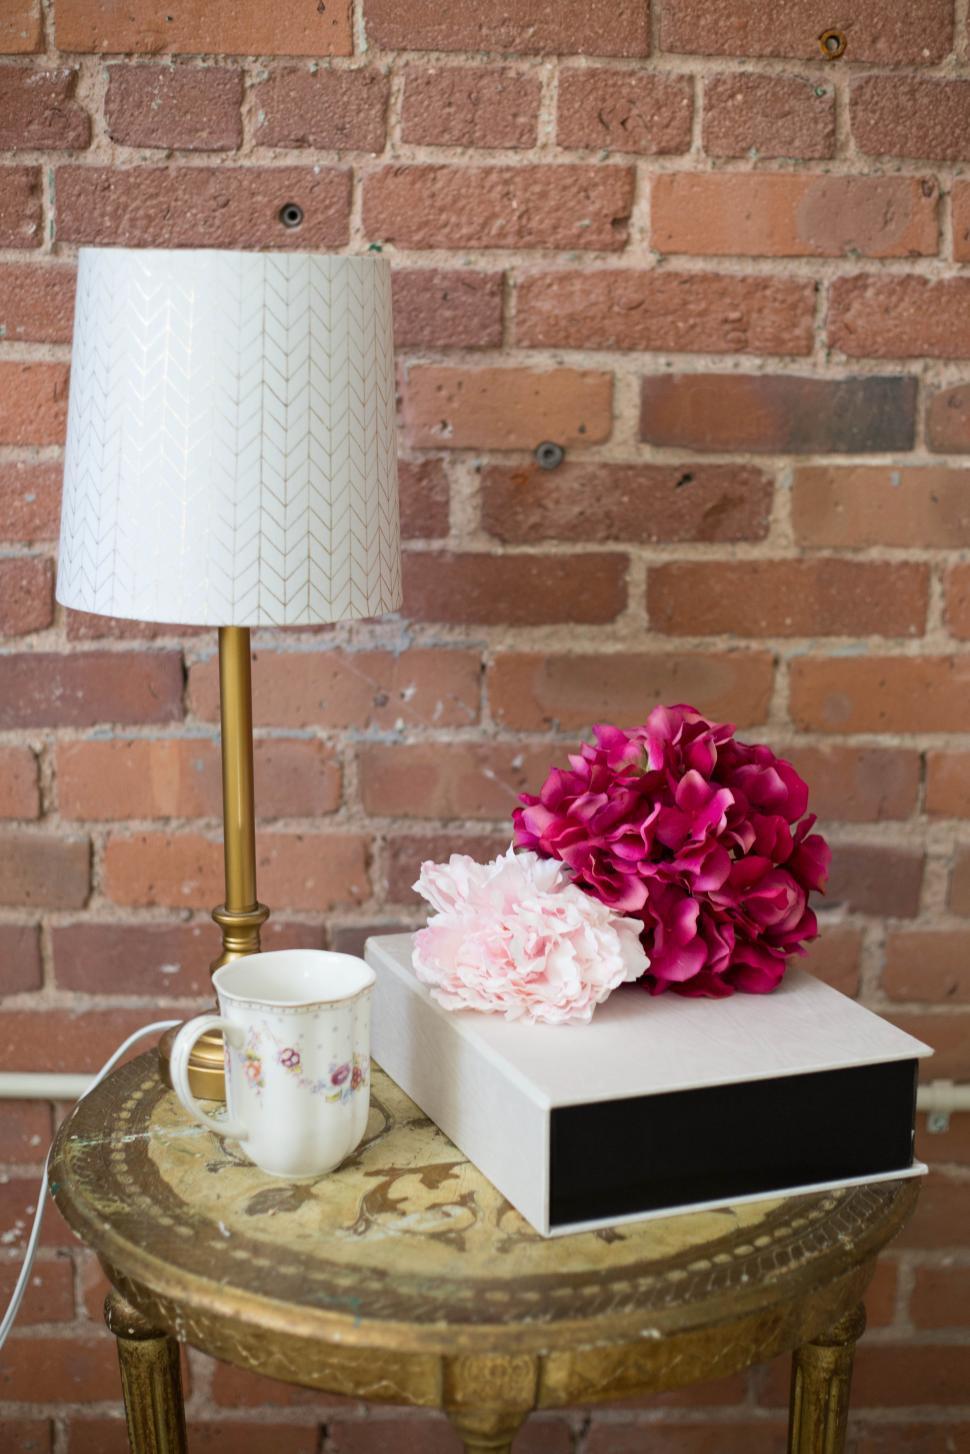 Free Image of A lamp and flowers on a table 